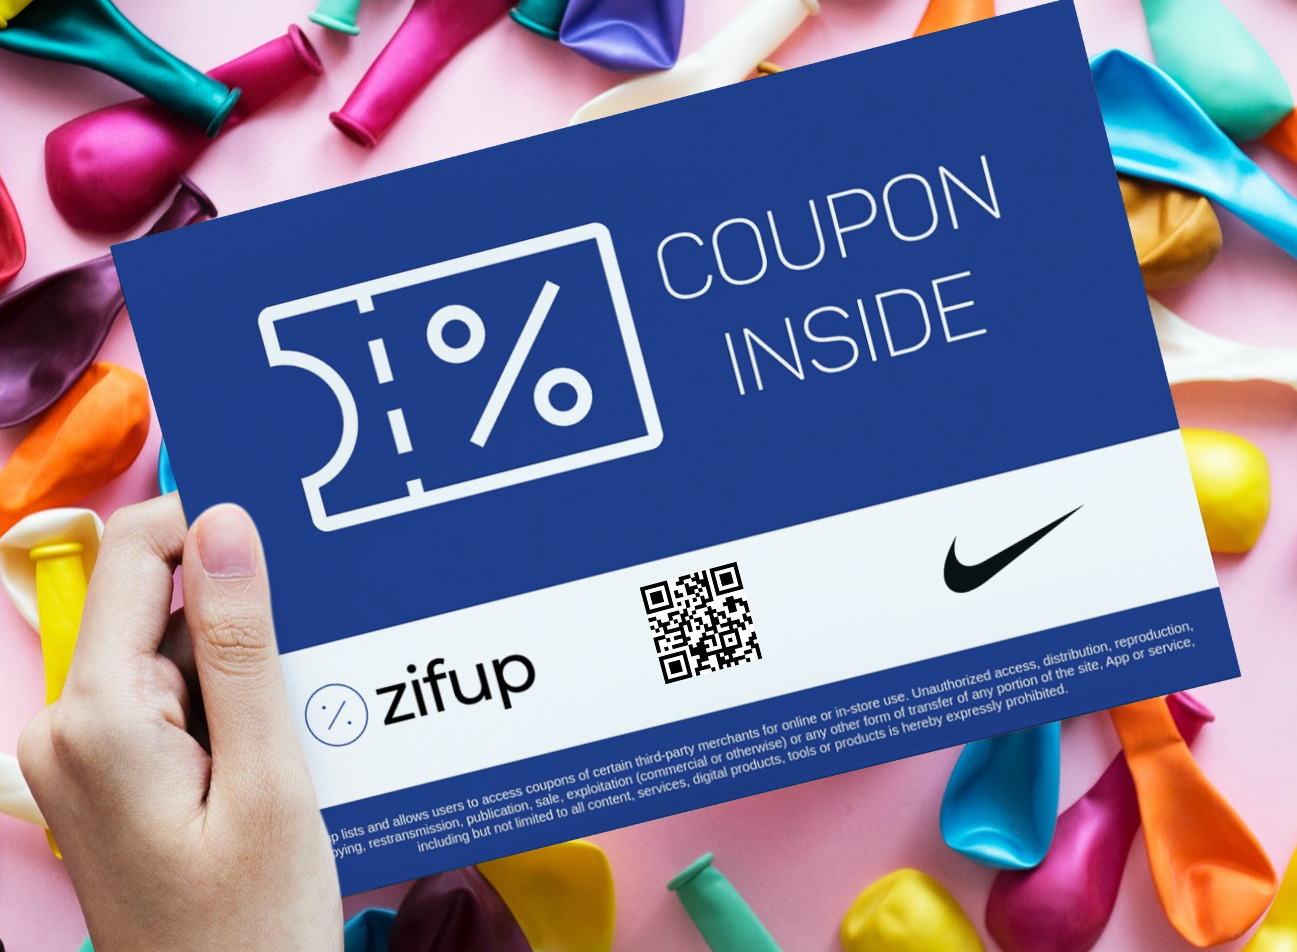 Nike Coupons and Offers for February Zifup